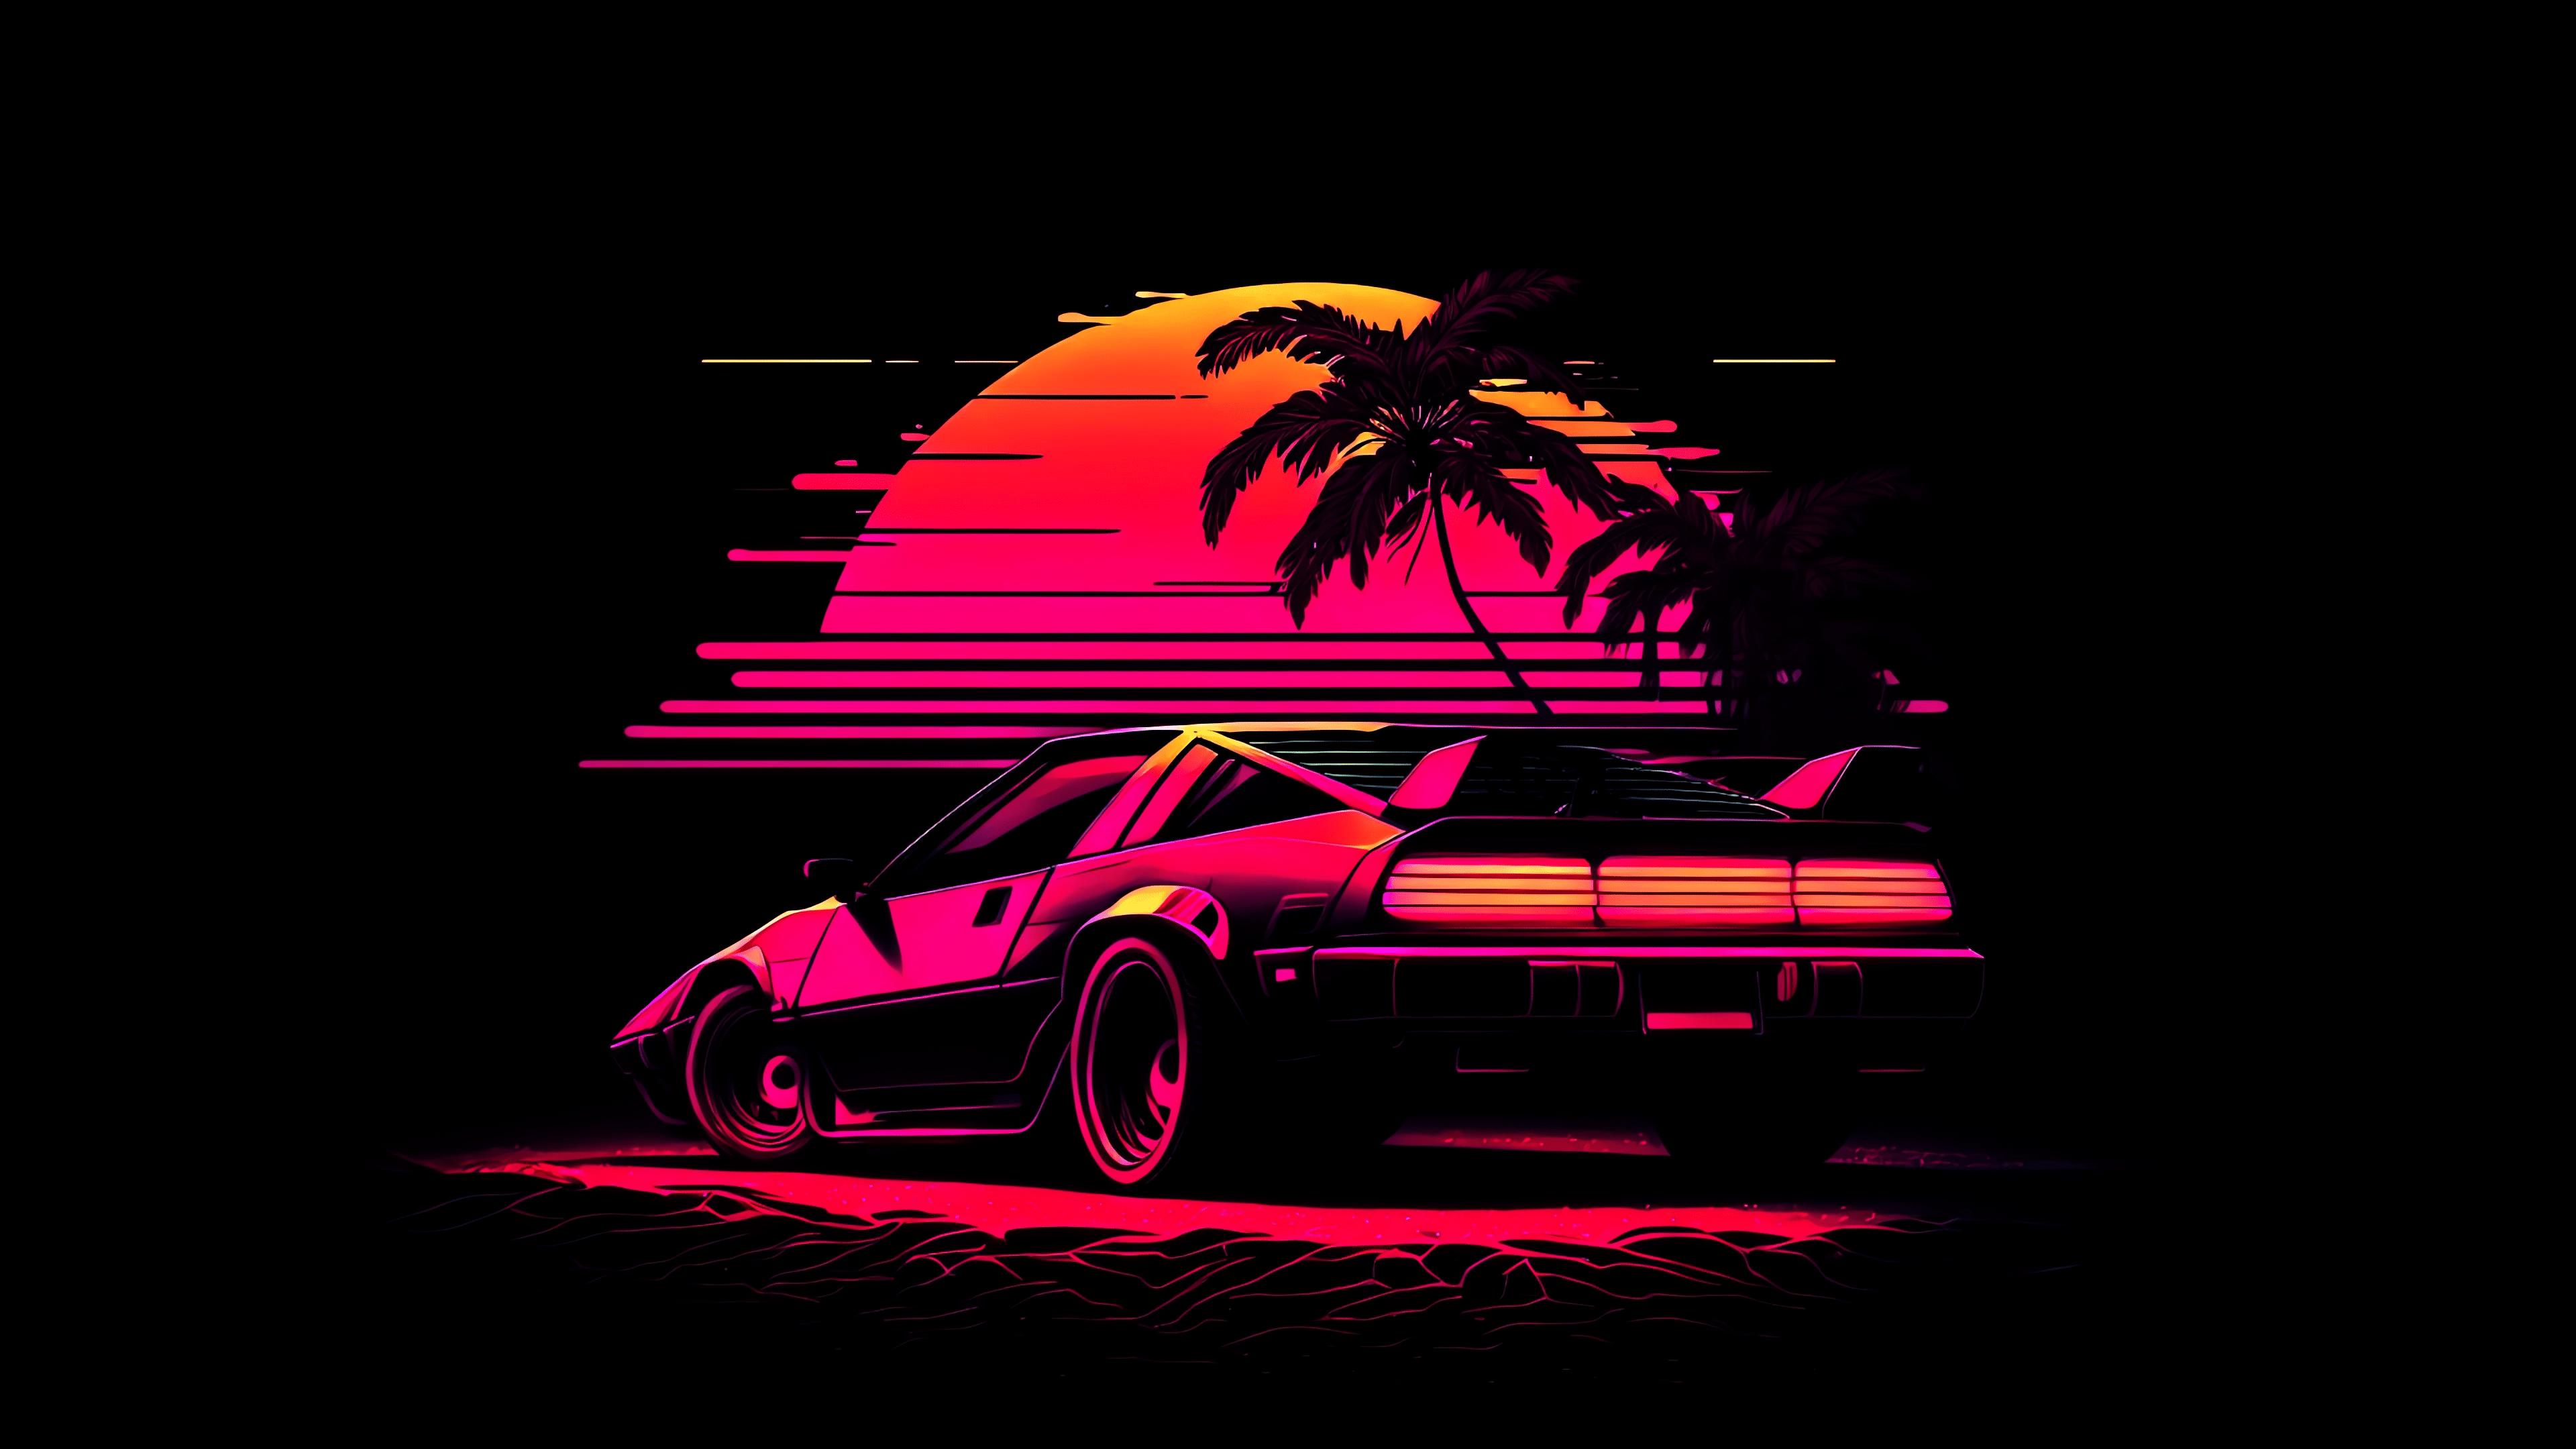 Retro Waves: 4K Synthwave Car Sunset Wallpaper Download for PC